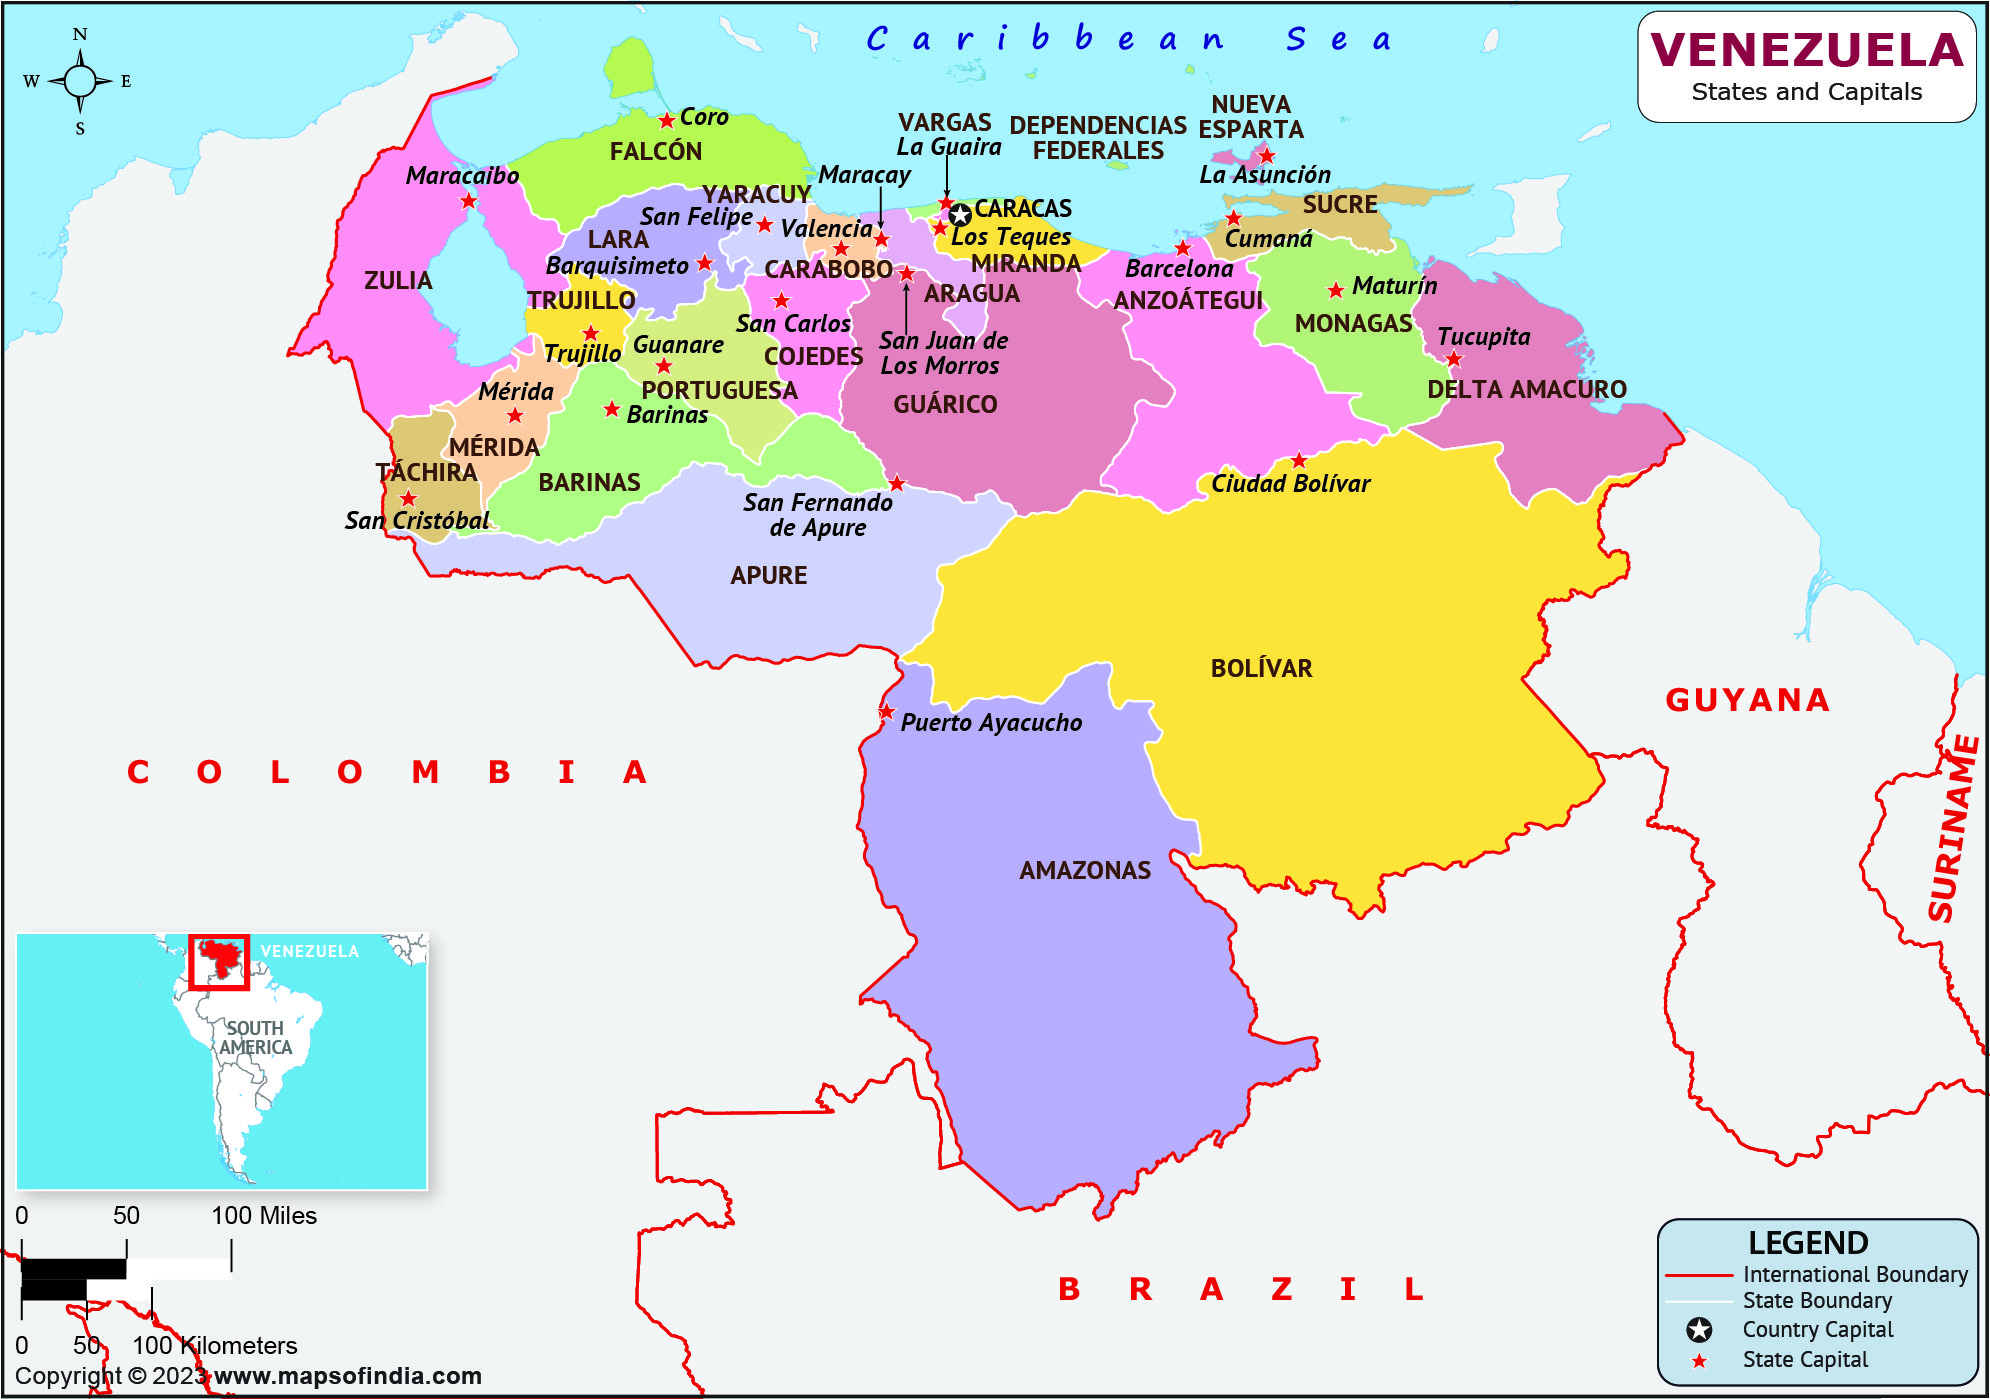 Venezuela Regions And Capitals List And Map List Of Regions And